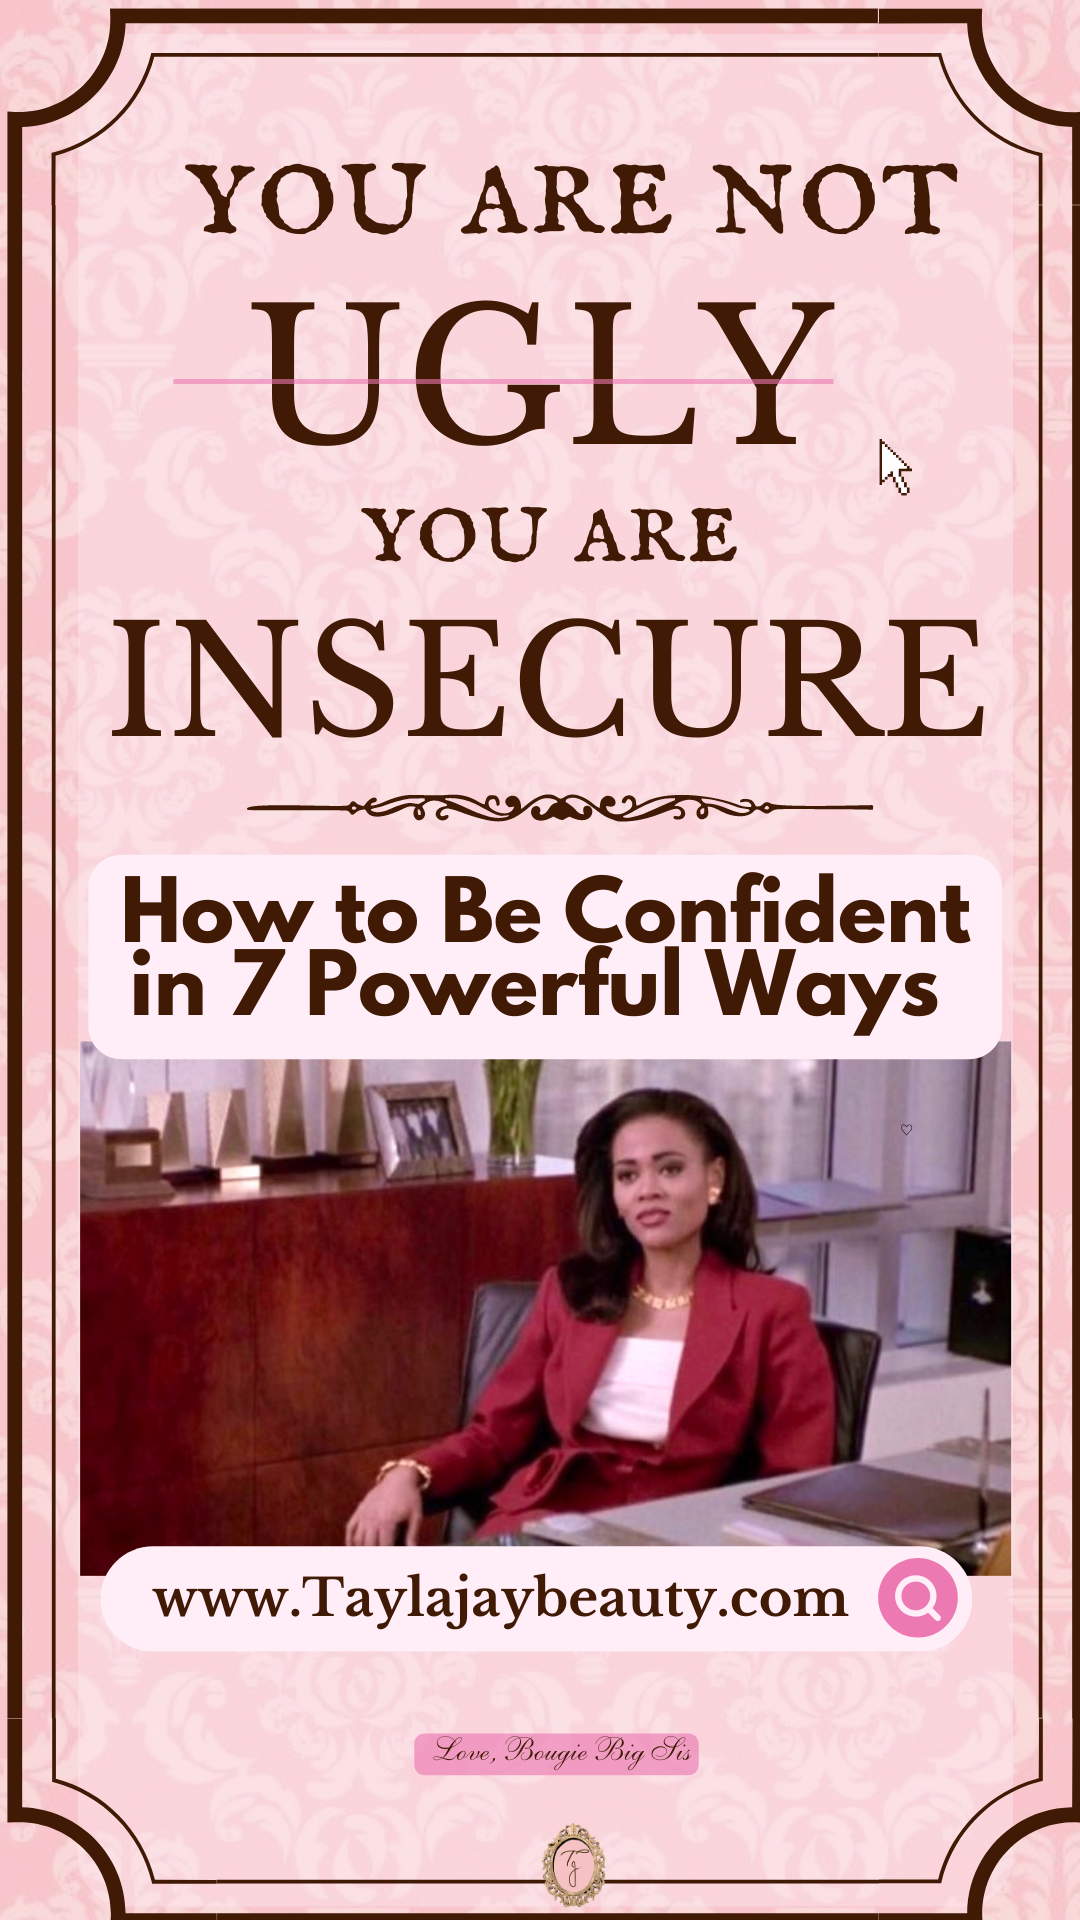 You are Not Ugly You are Insecure: How to Be Confident in 7 Powerful Ways